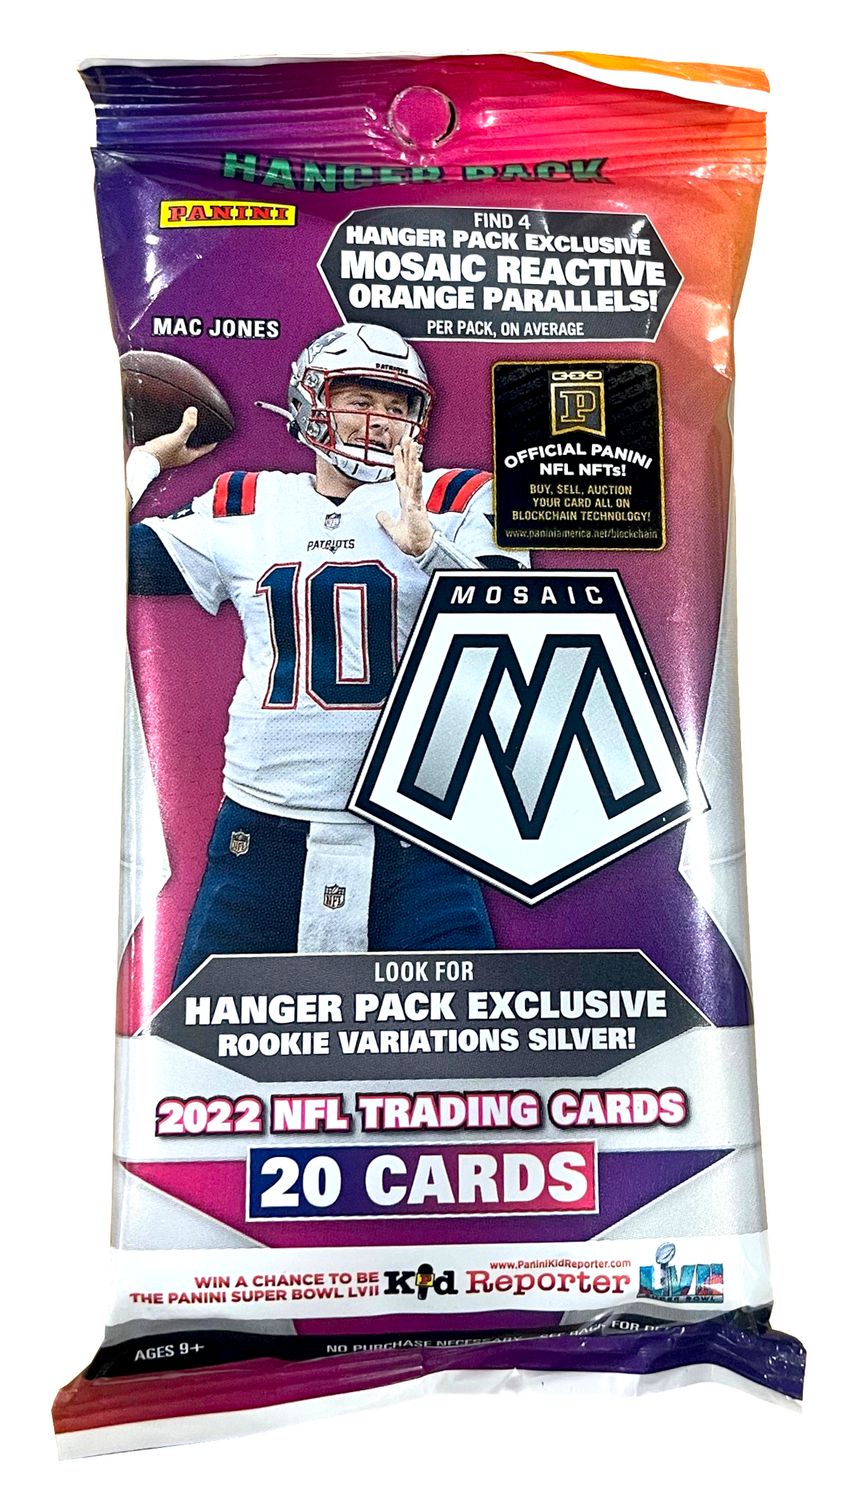 18 cartes à collectionner exclusives Panini NFL Football Hanger Box 